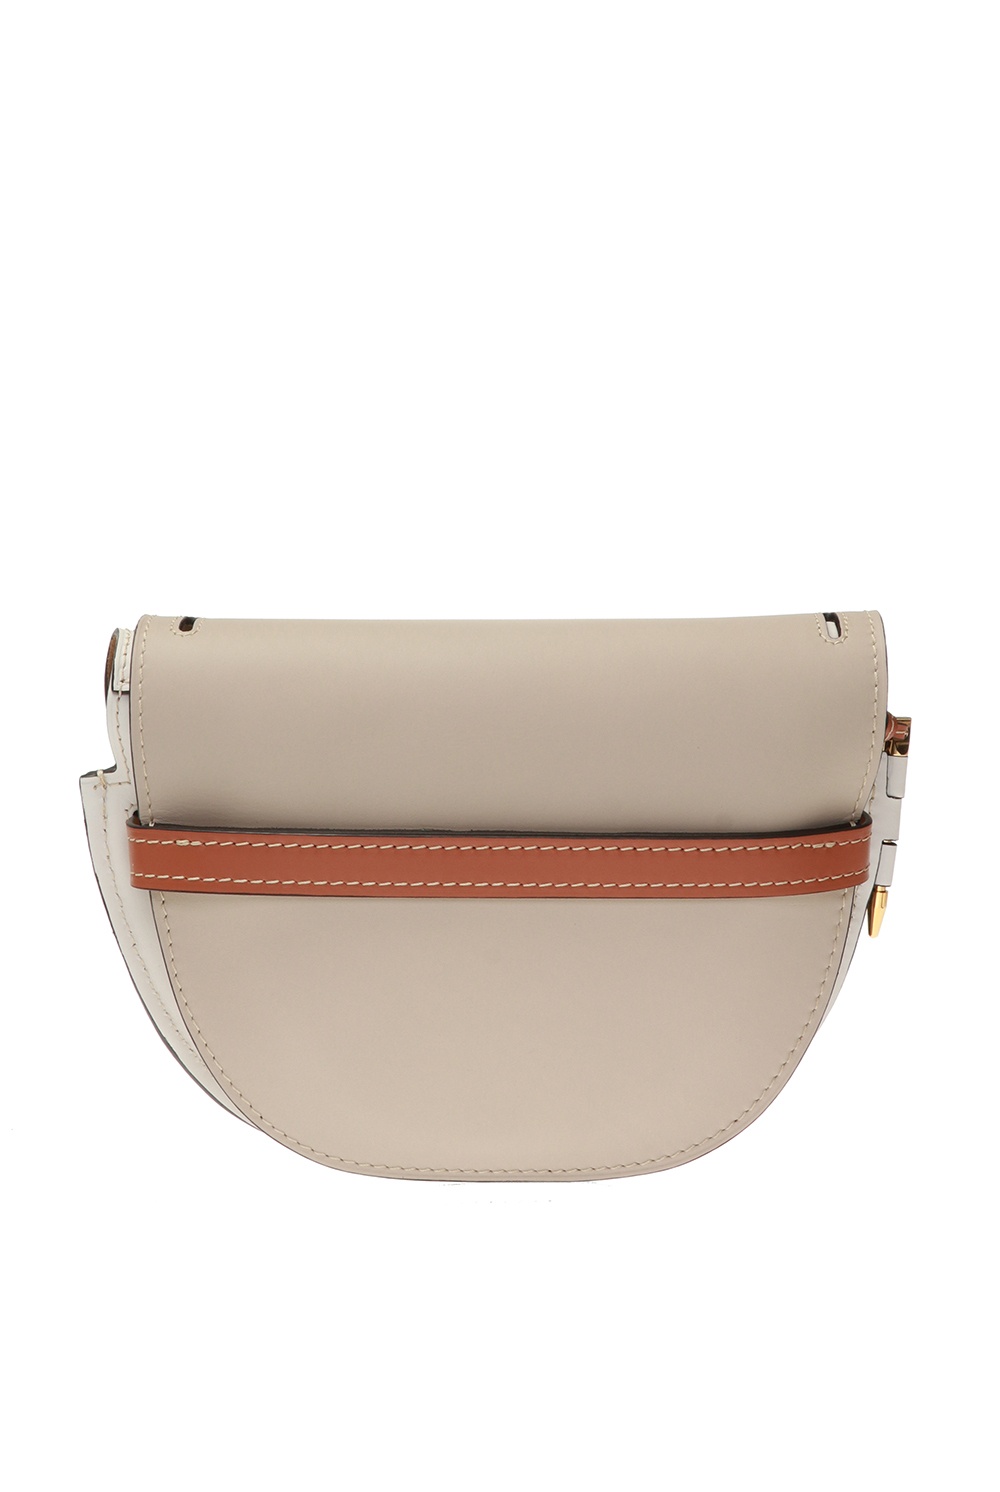 Kate Spade Small Andi Leather Belt Bag in Natural